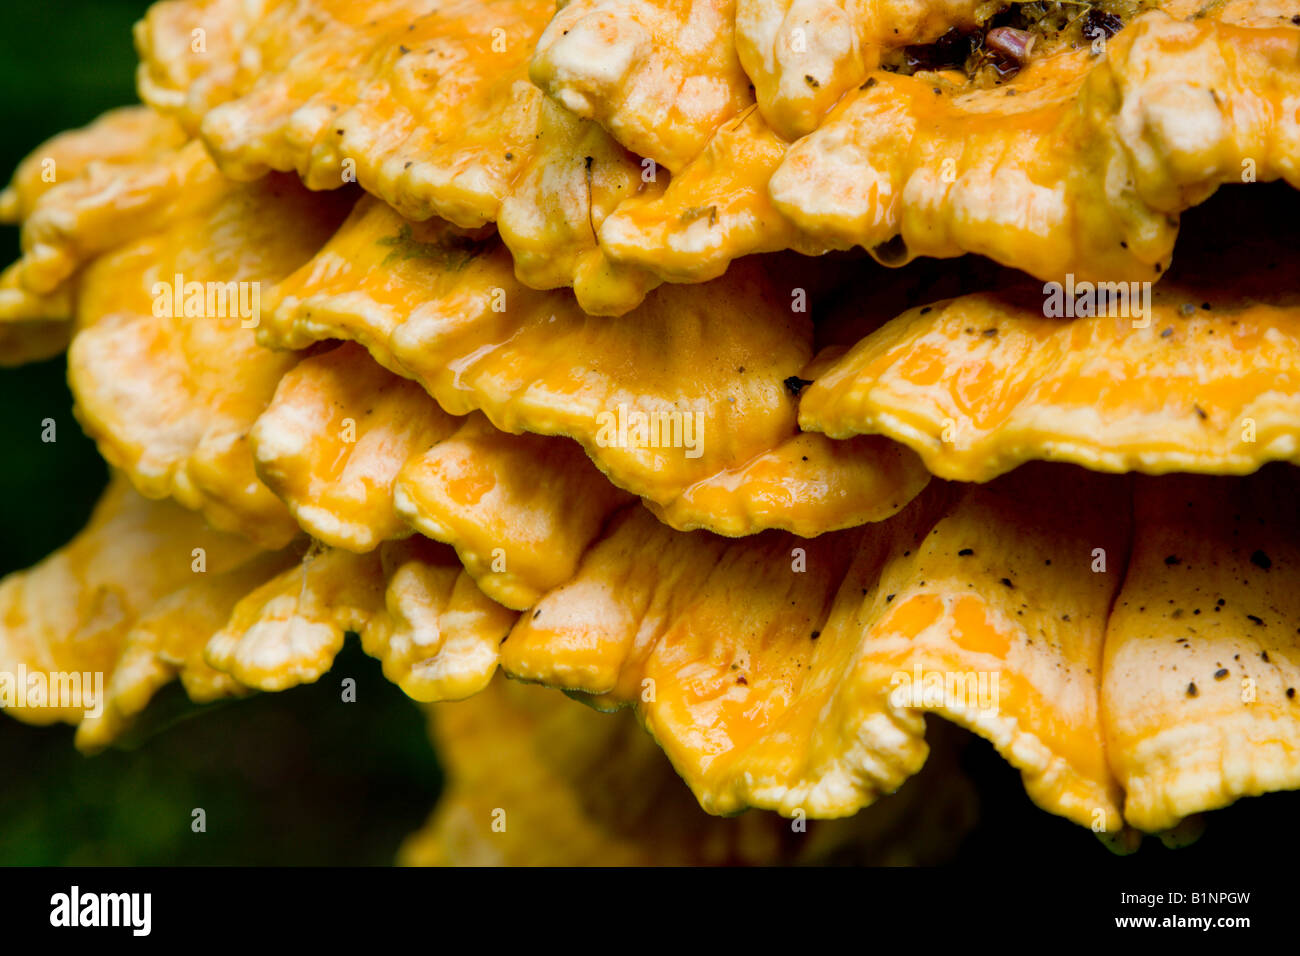 Sulphur Polypore or Chicken of the Woods, Ardent Stock Photo